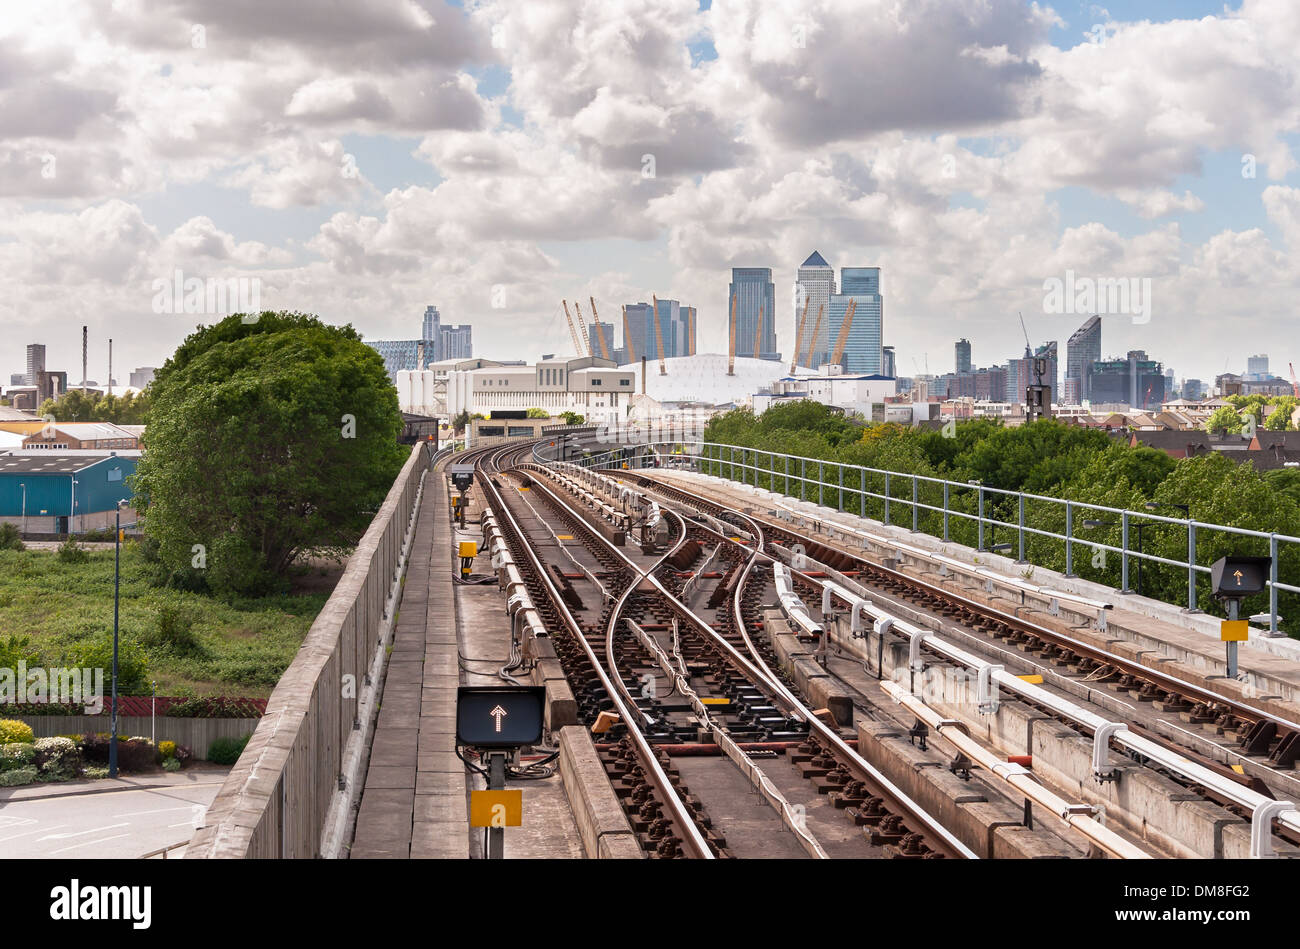 The railway tracks of Docklands Light Railway with Canary Wharf skyscrapers in the background. Stock Photo